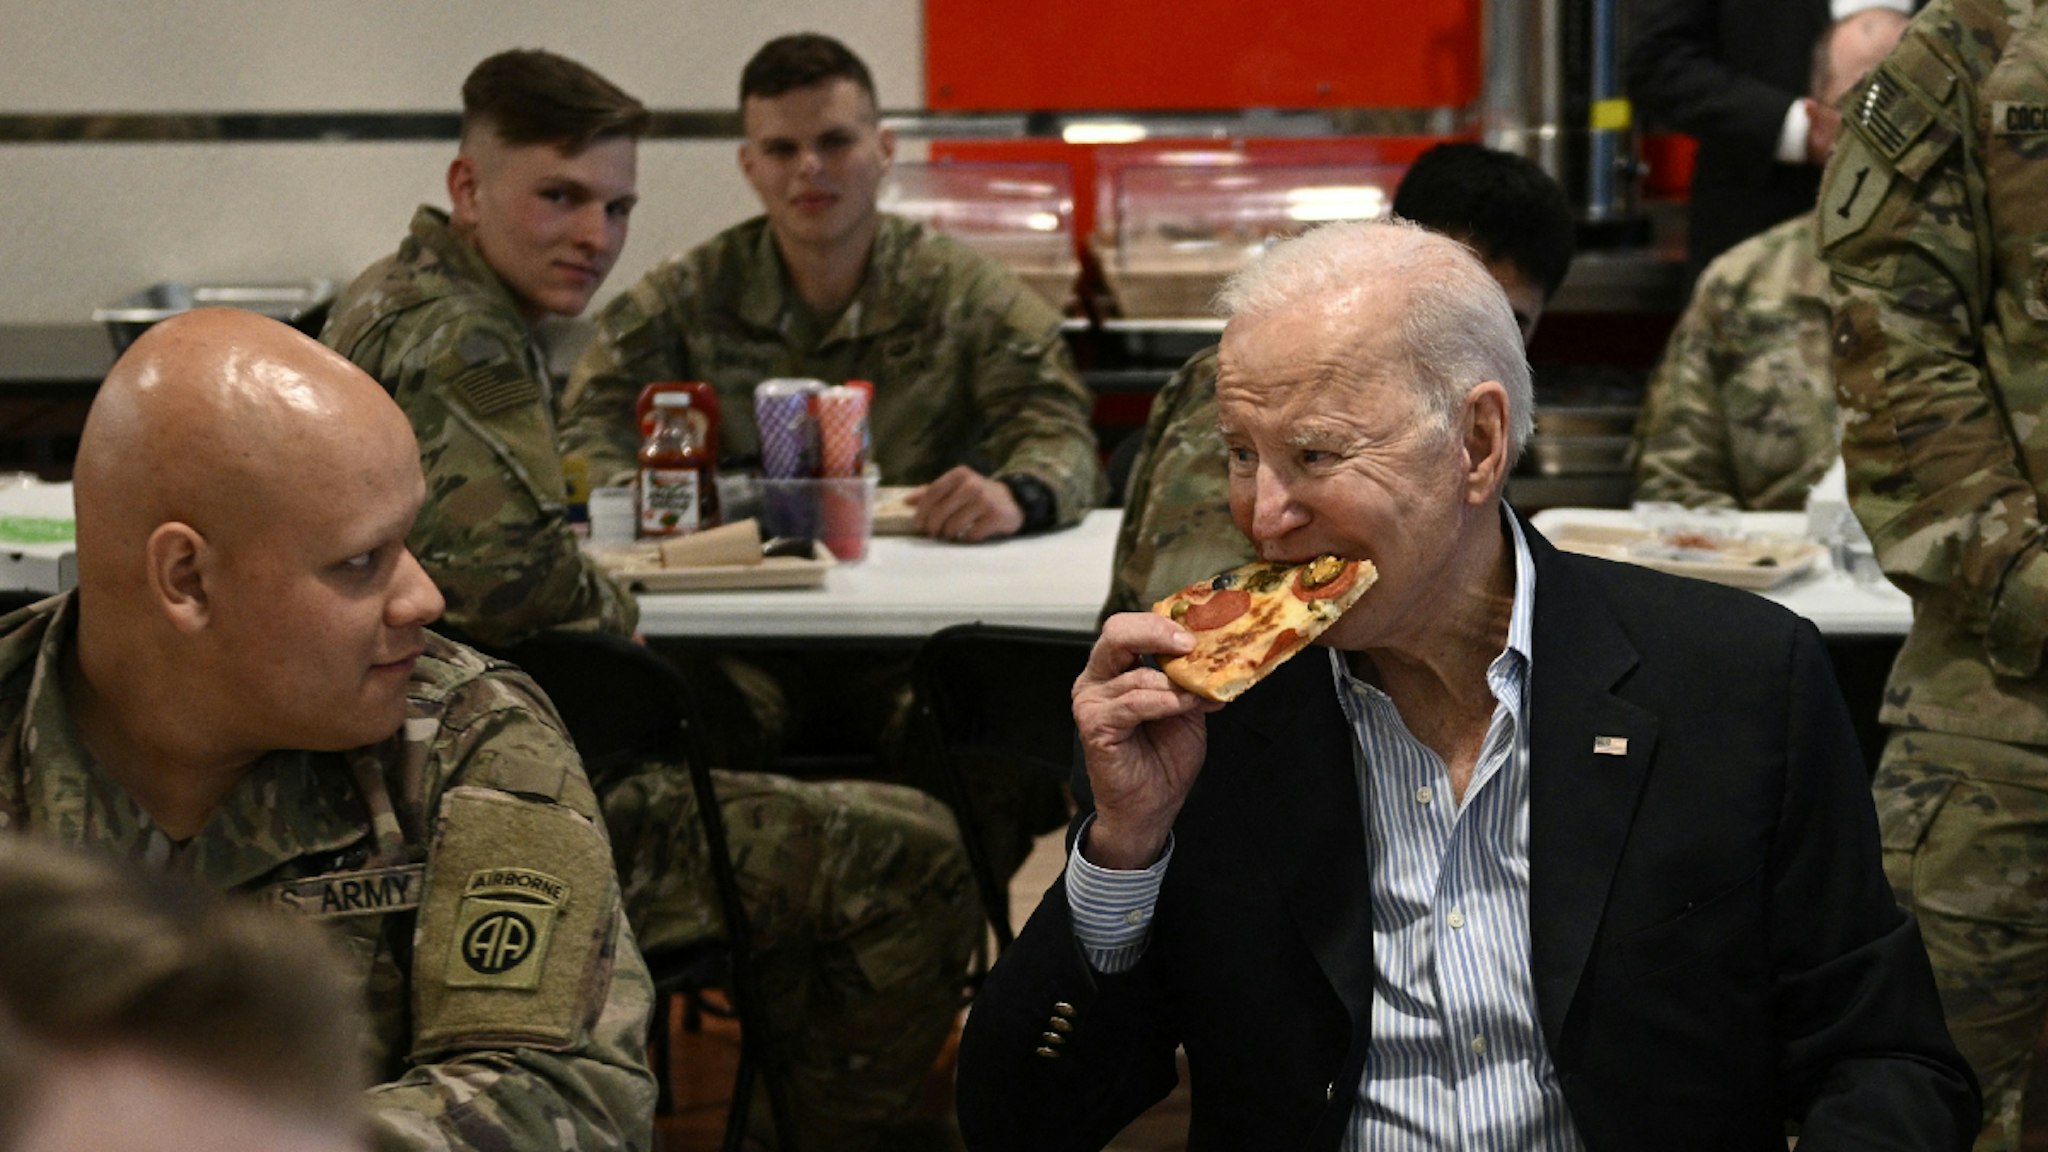 US President Joe Biden (C) eats a pizza as he meets with service members from the 82nd Airborne Division, who are contributing alongside Polish Allies to deterrence on the Alliances Eastern Flank, in the city of Rzeszow in southeastern Poland, around 100 kilometres (62 miles) from the border with Ukraine, on March 25, 2022.